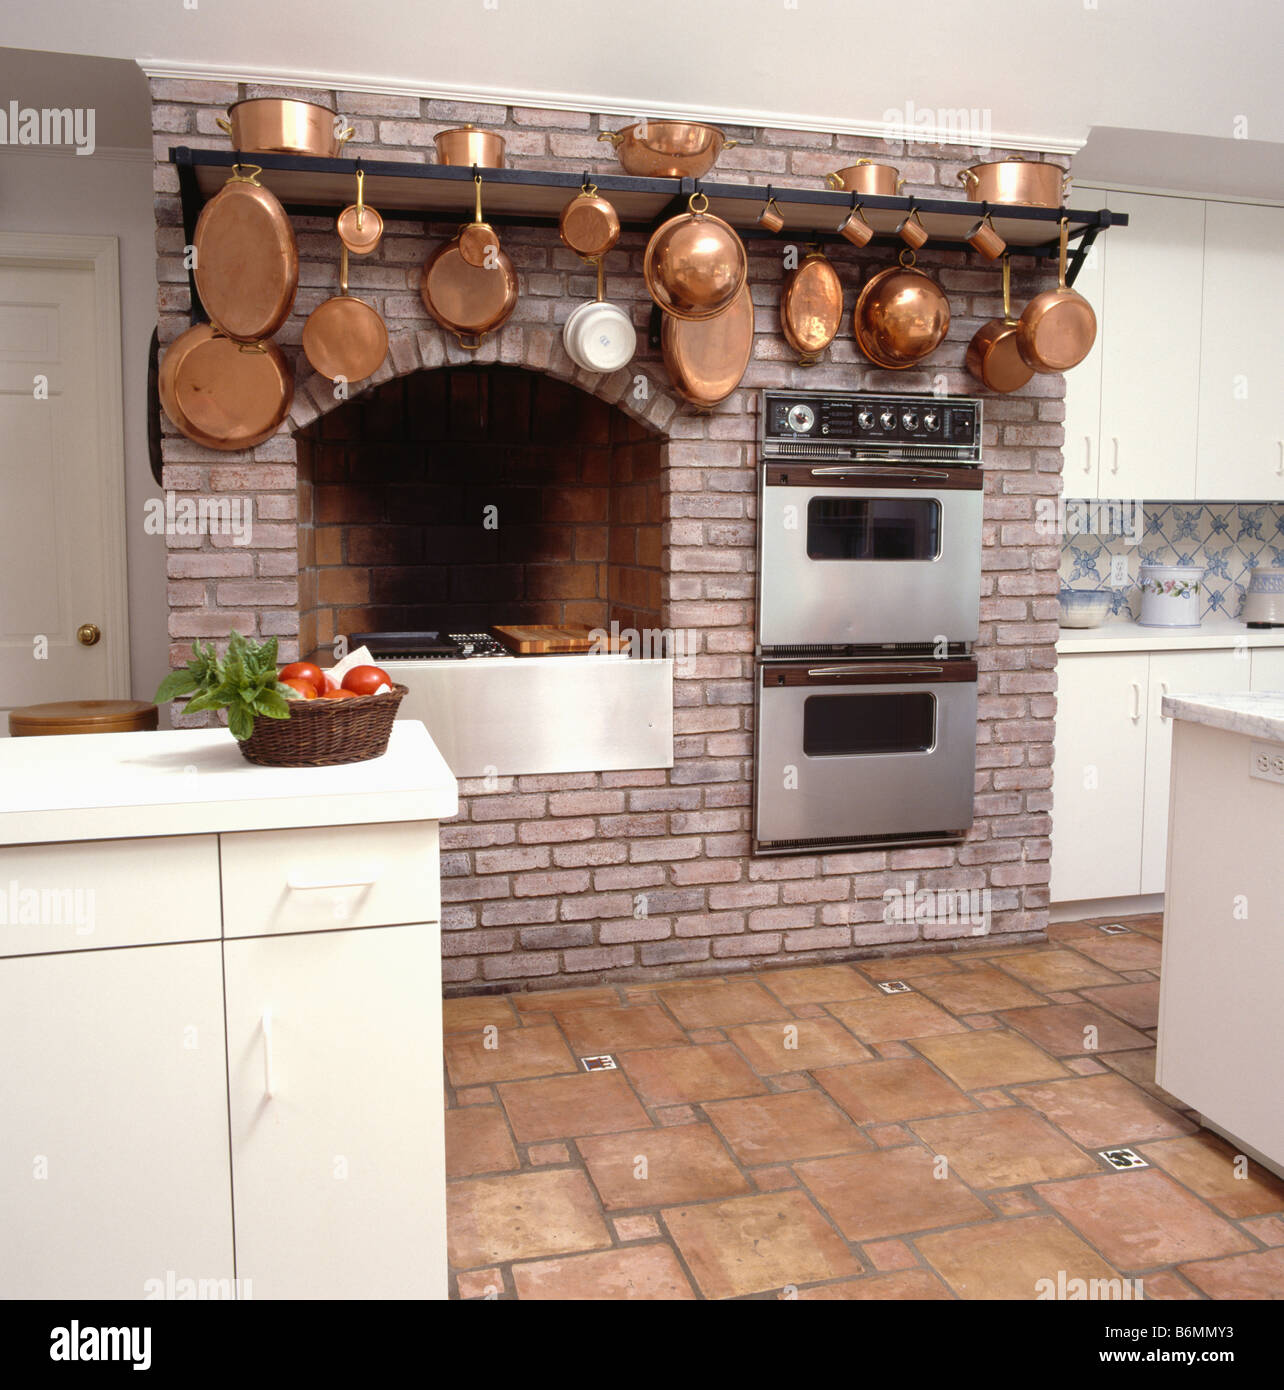 Copper pans on rack above double ovens and hob fitted into brick fireplace alcove in kitchen with terracotta floor tiles Stock Photo